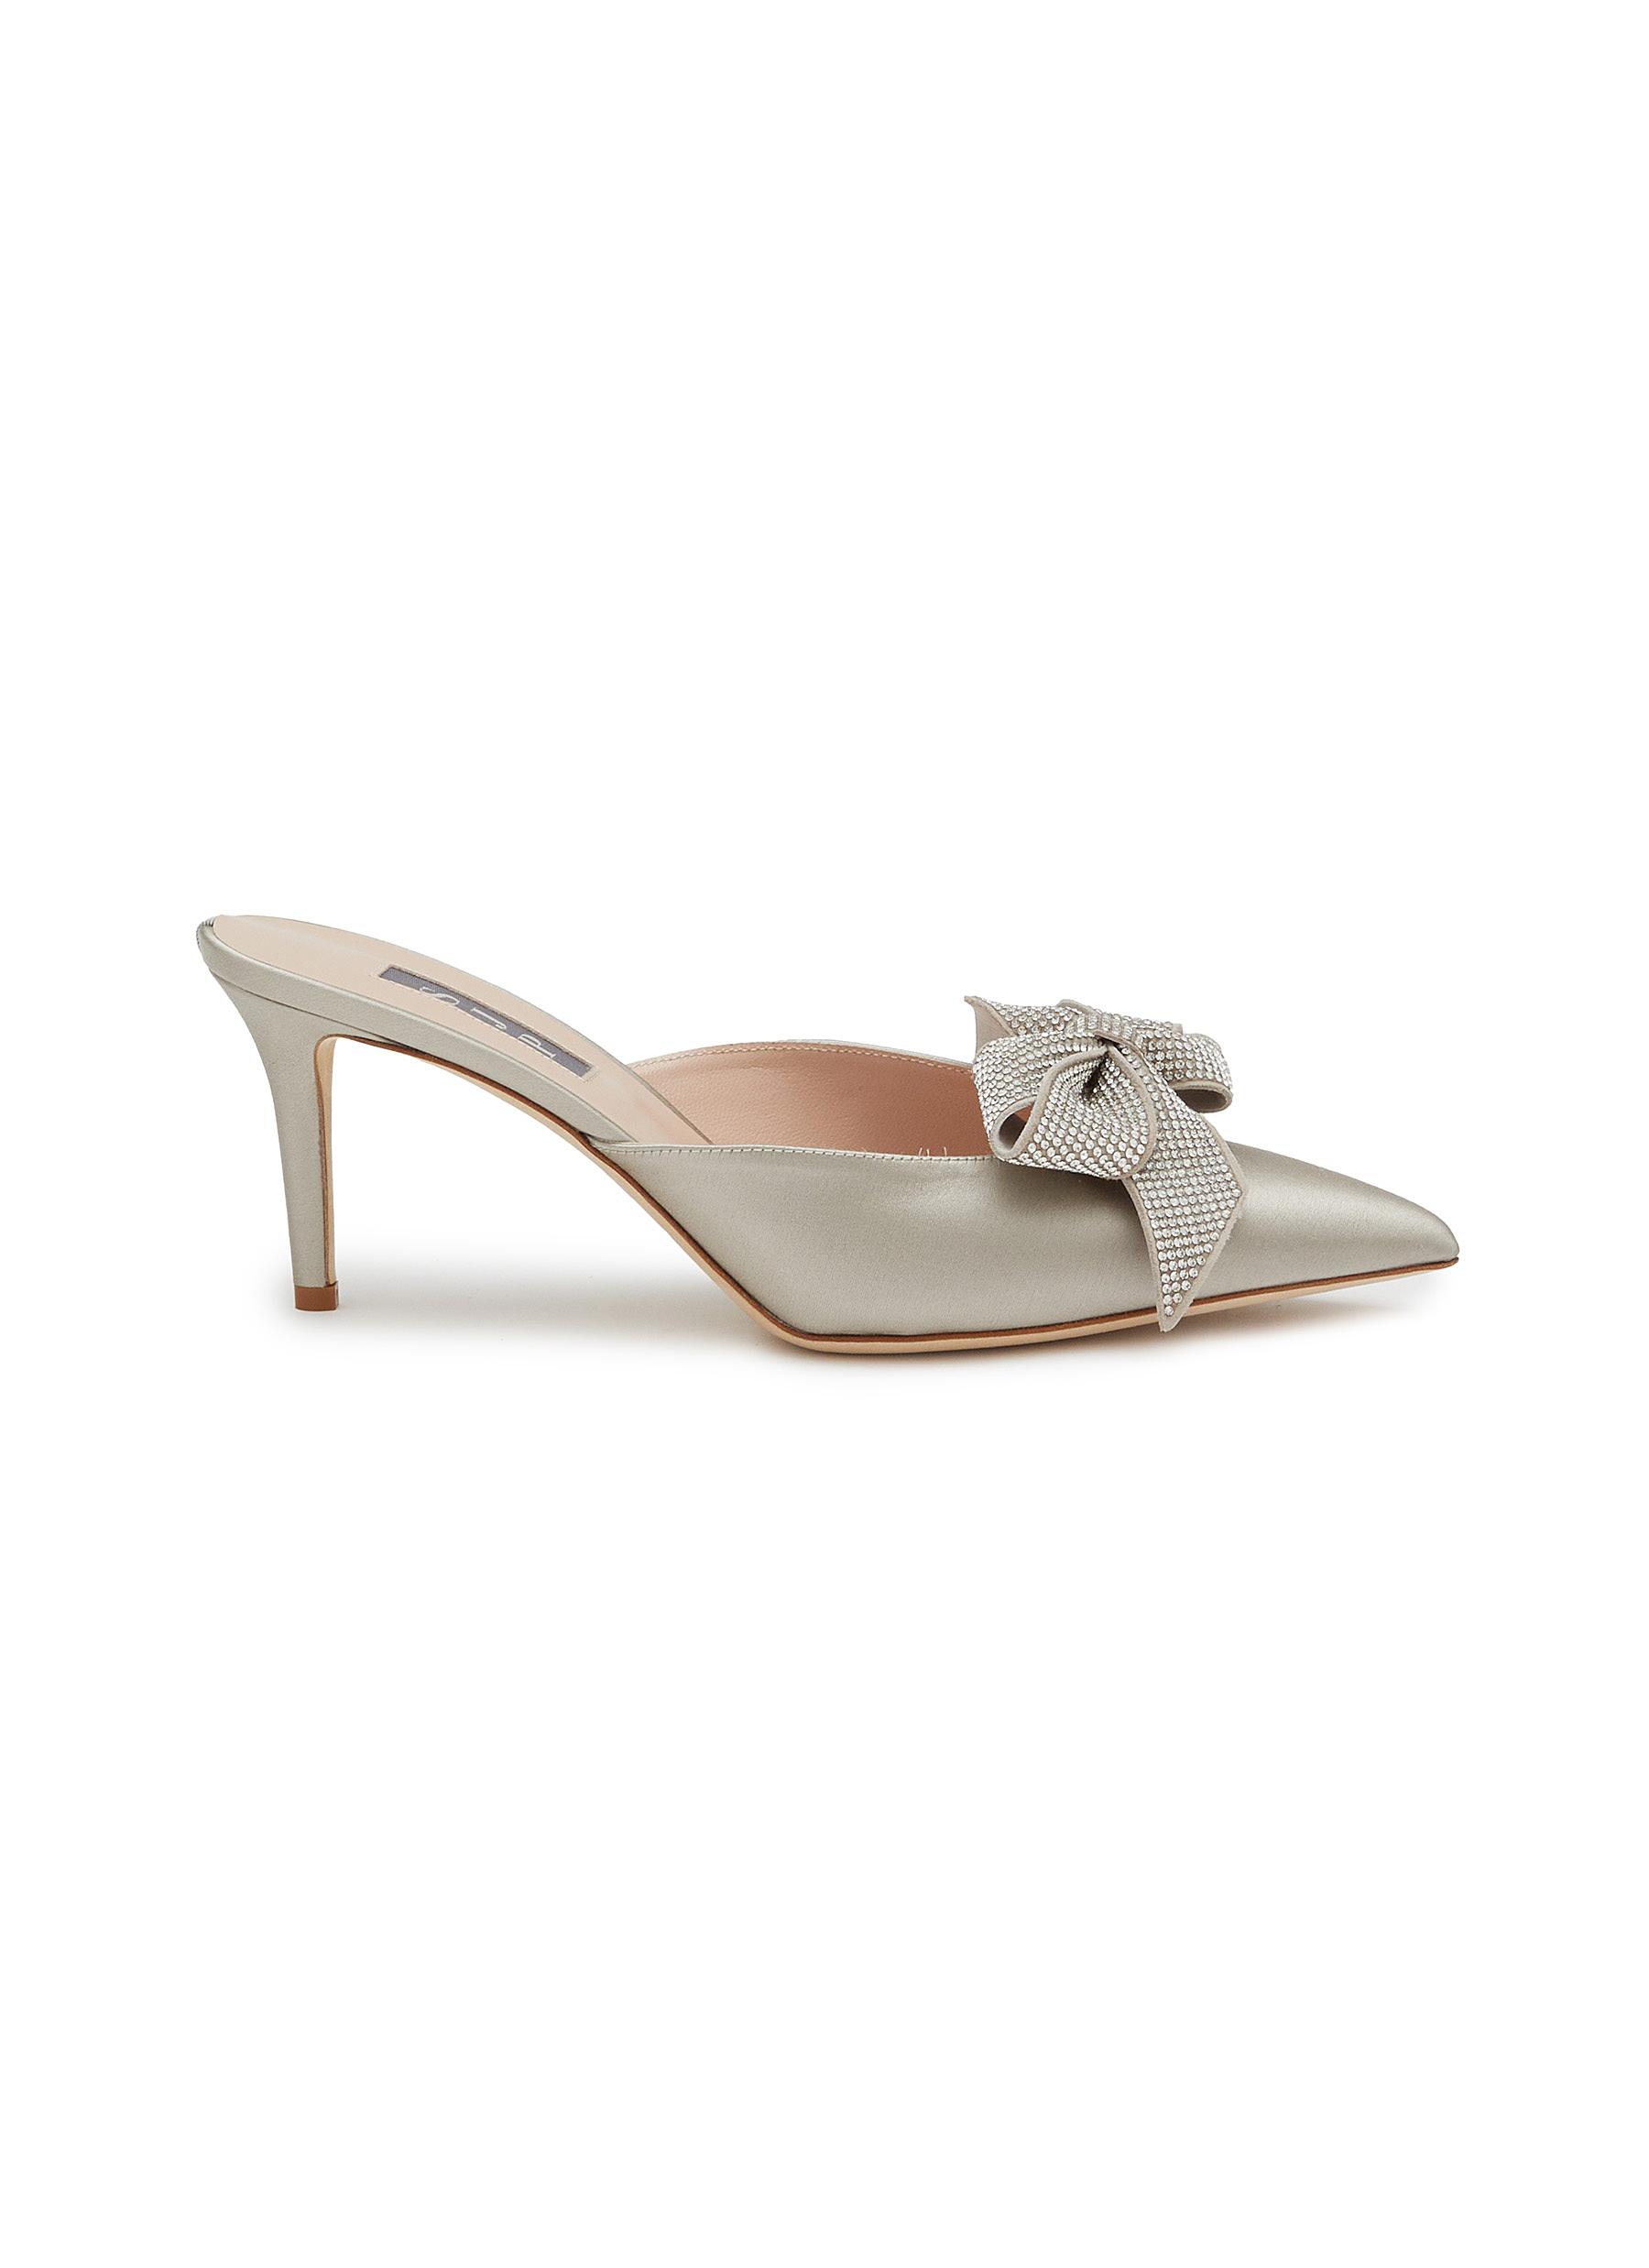 Paley 70 Crystal Bow Satin Mule